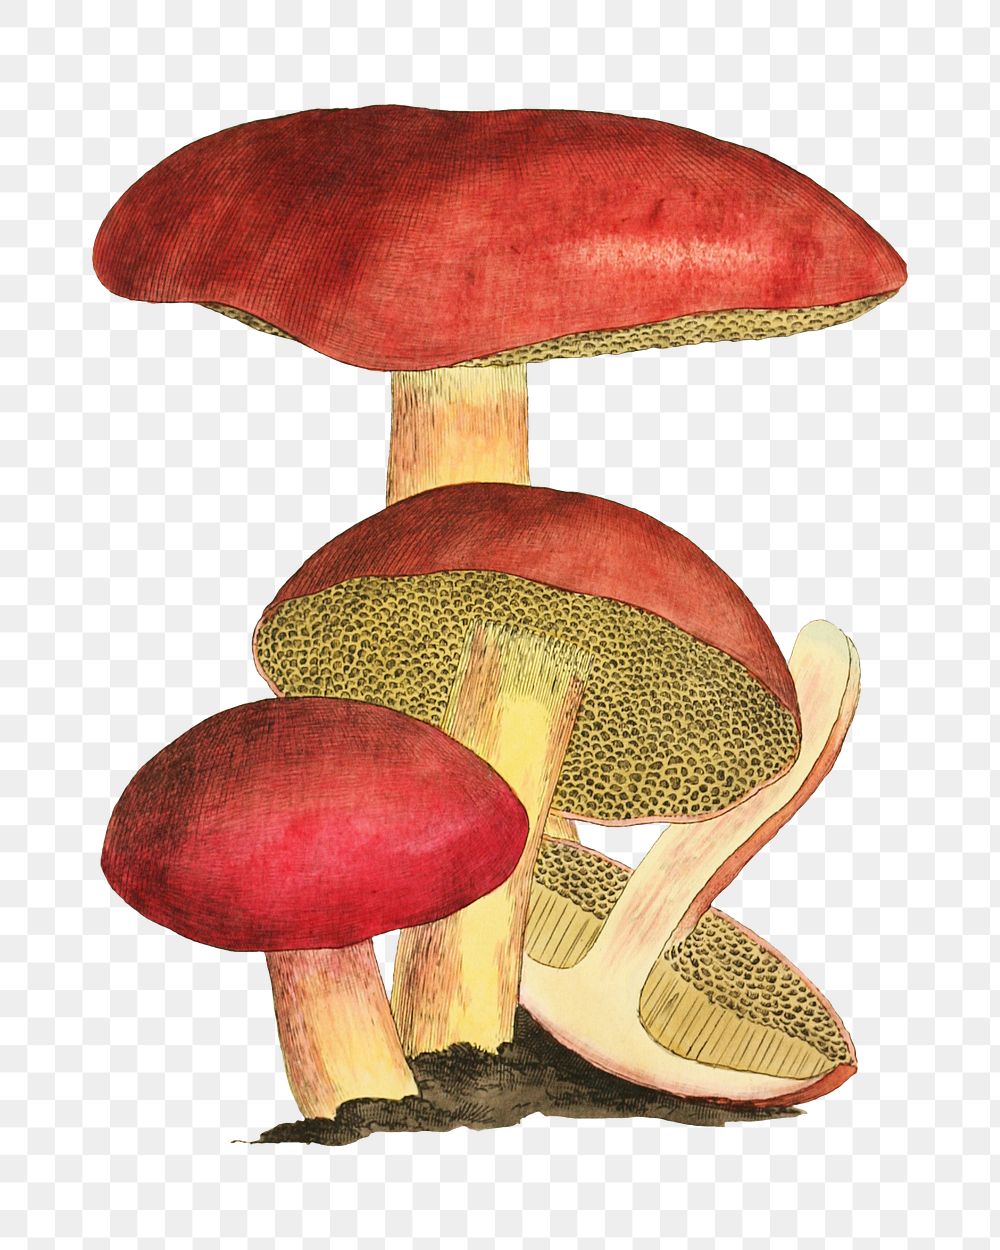 PNG Red mushroom, vintage botanical illustration by James Sowerby, transparent background. Remixed by rawpixel.